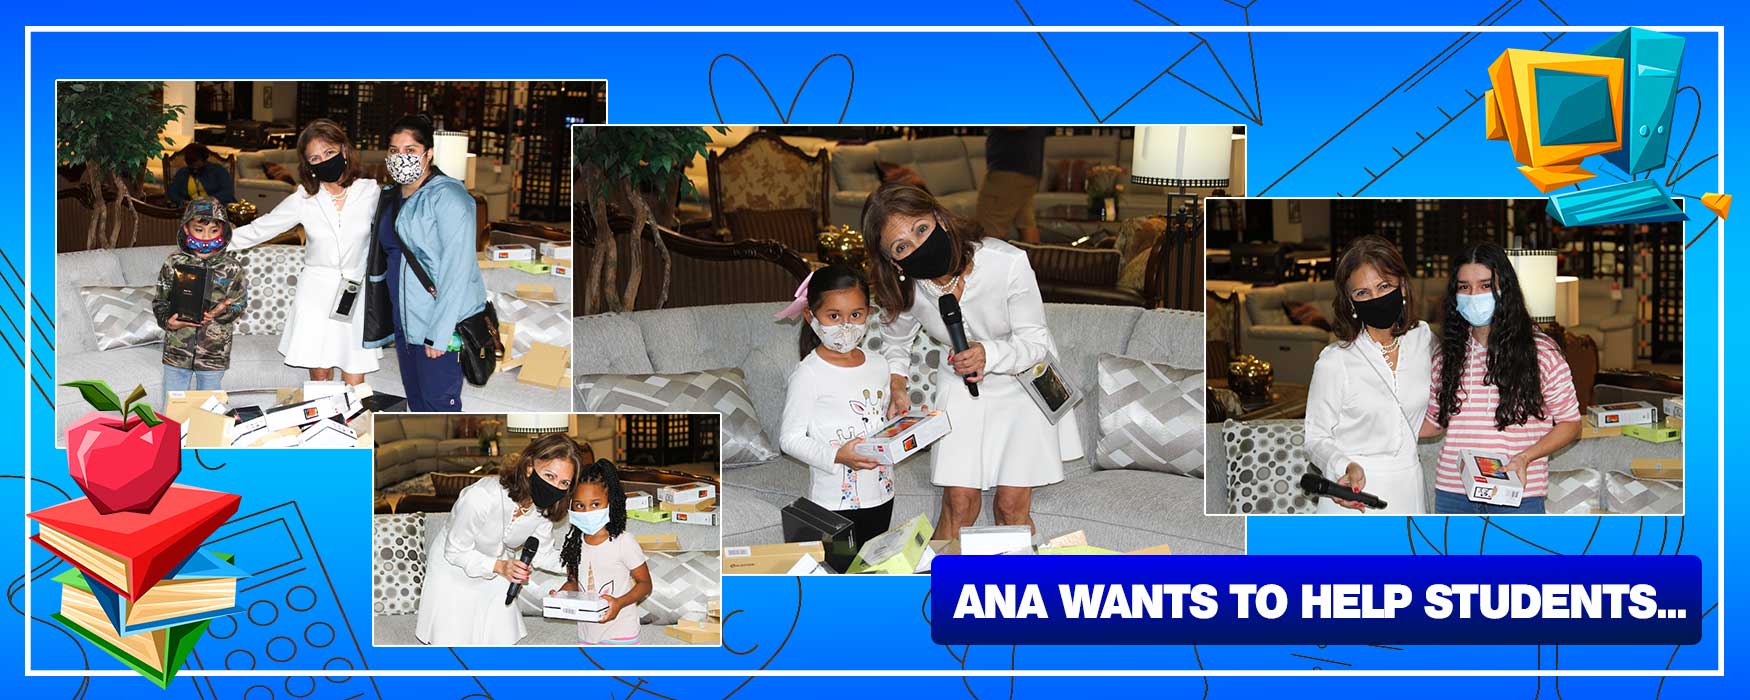 Ana helping students in need